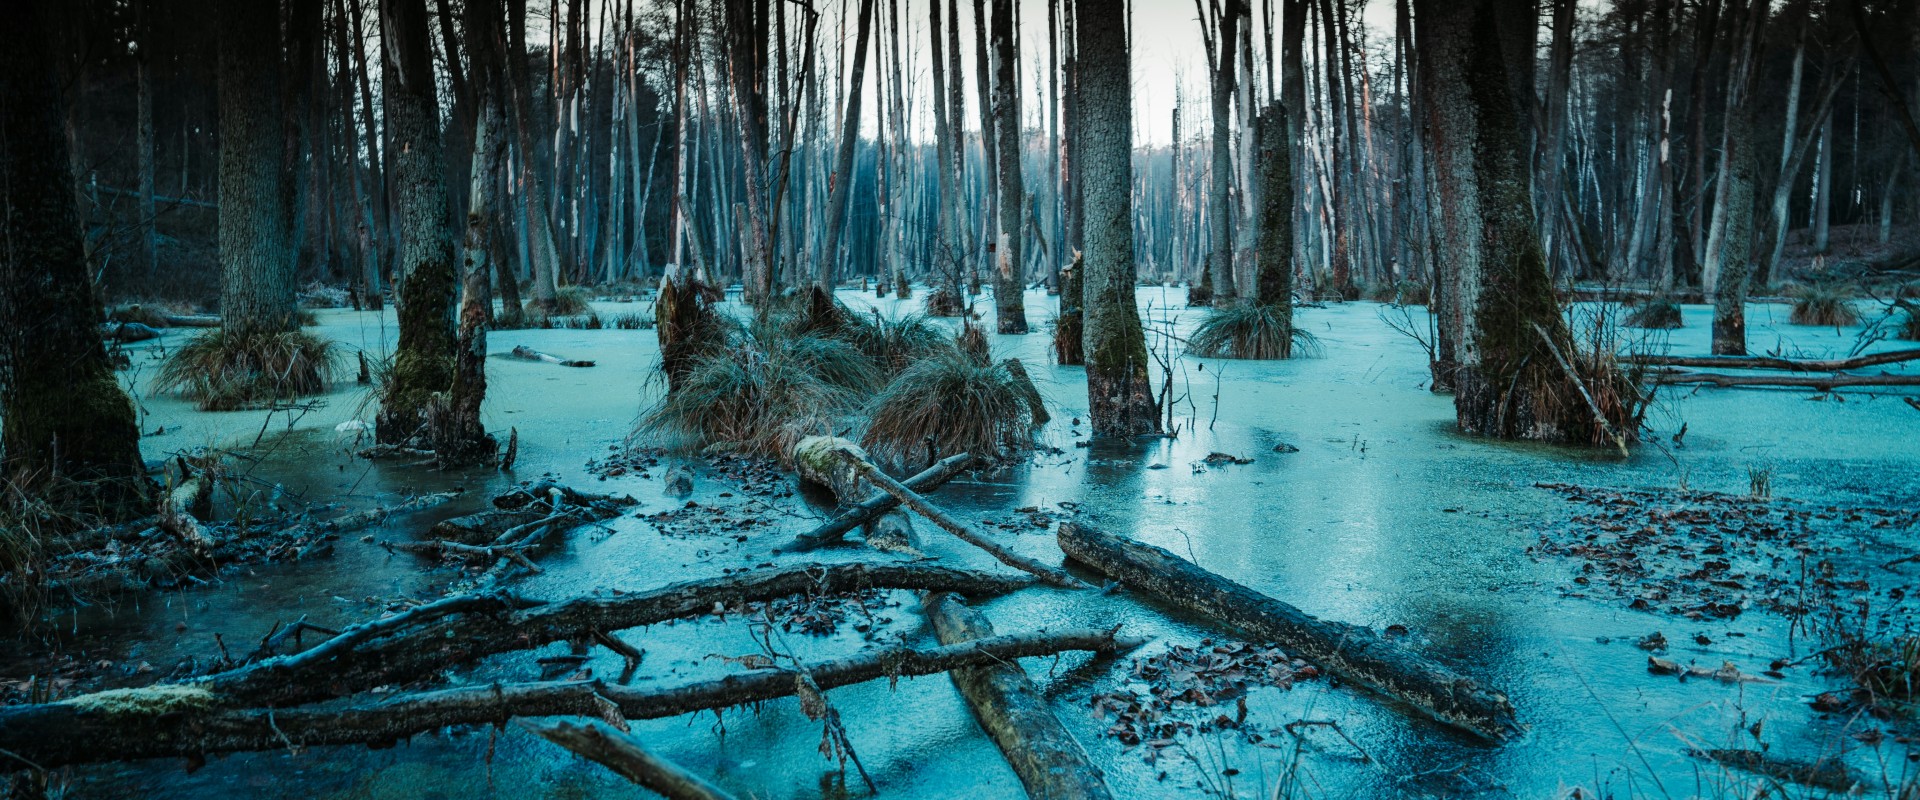 Tangle of bare trees and swampy ground in weird blue light